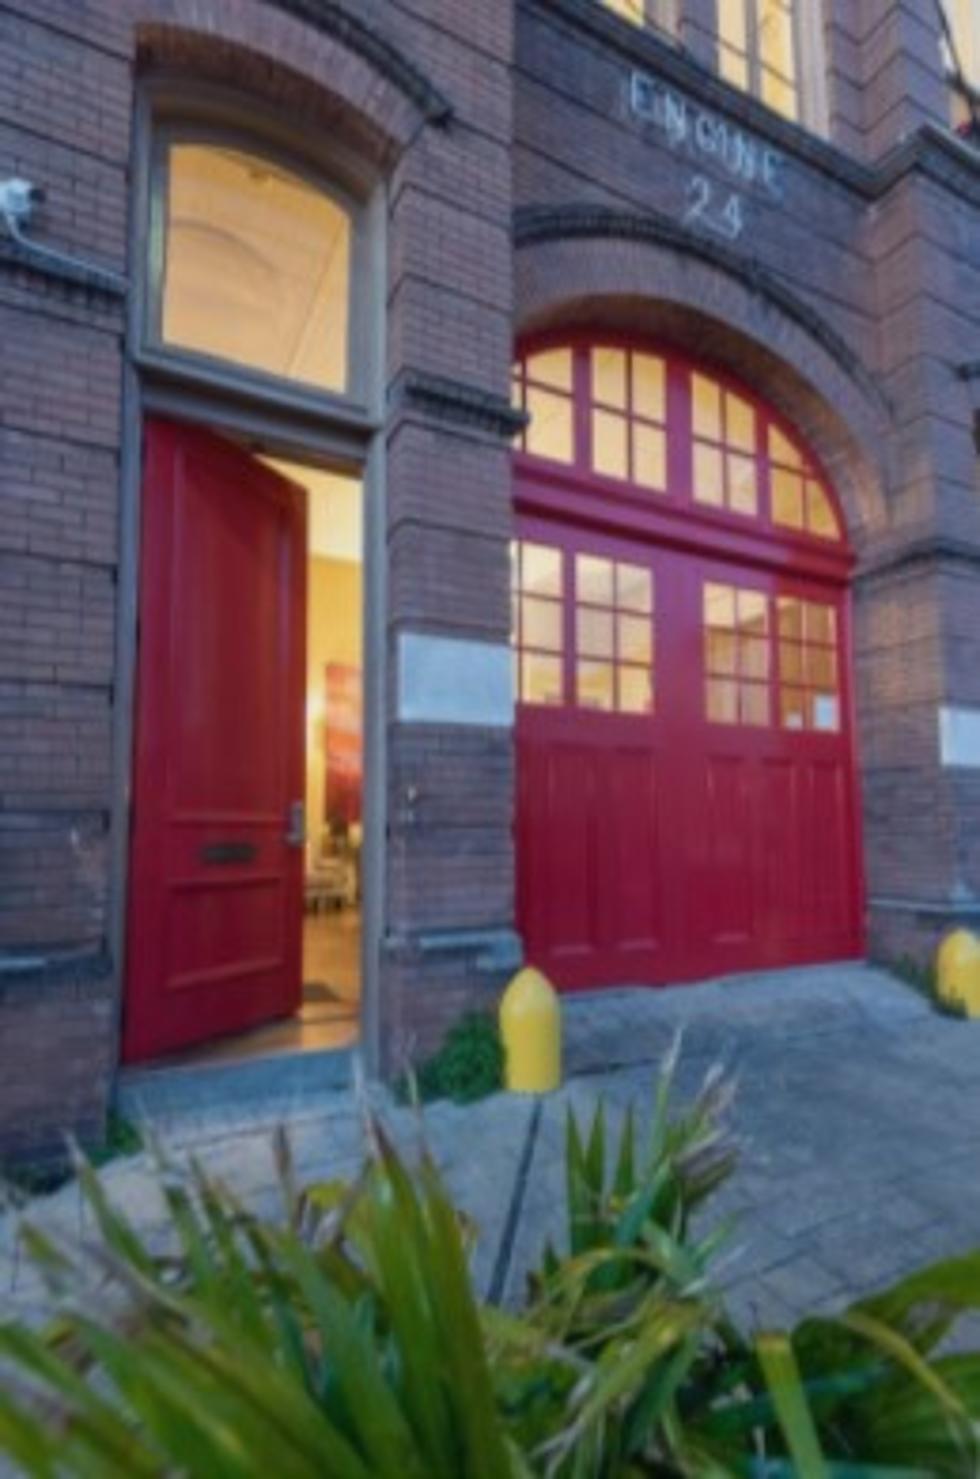 Make Your Weekend Fire! Stay at the Station 24 Airbnb in NOLA